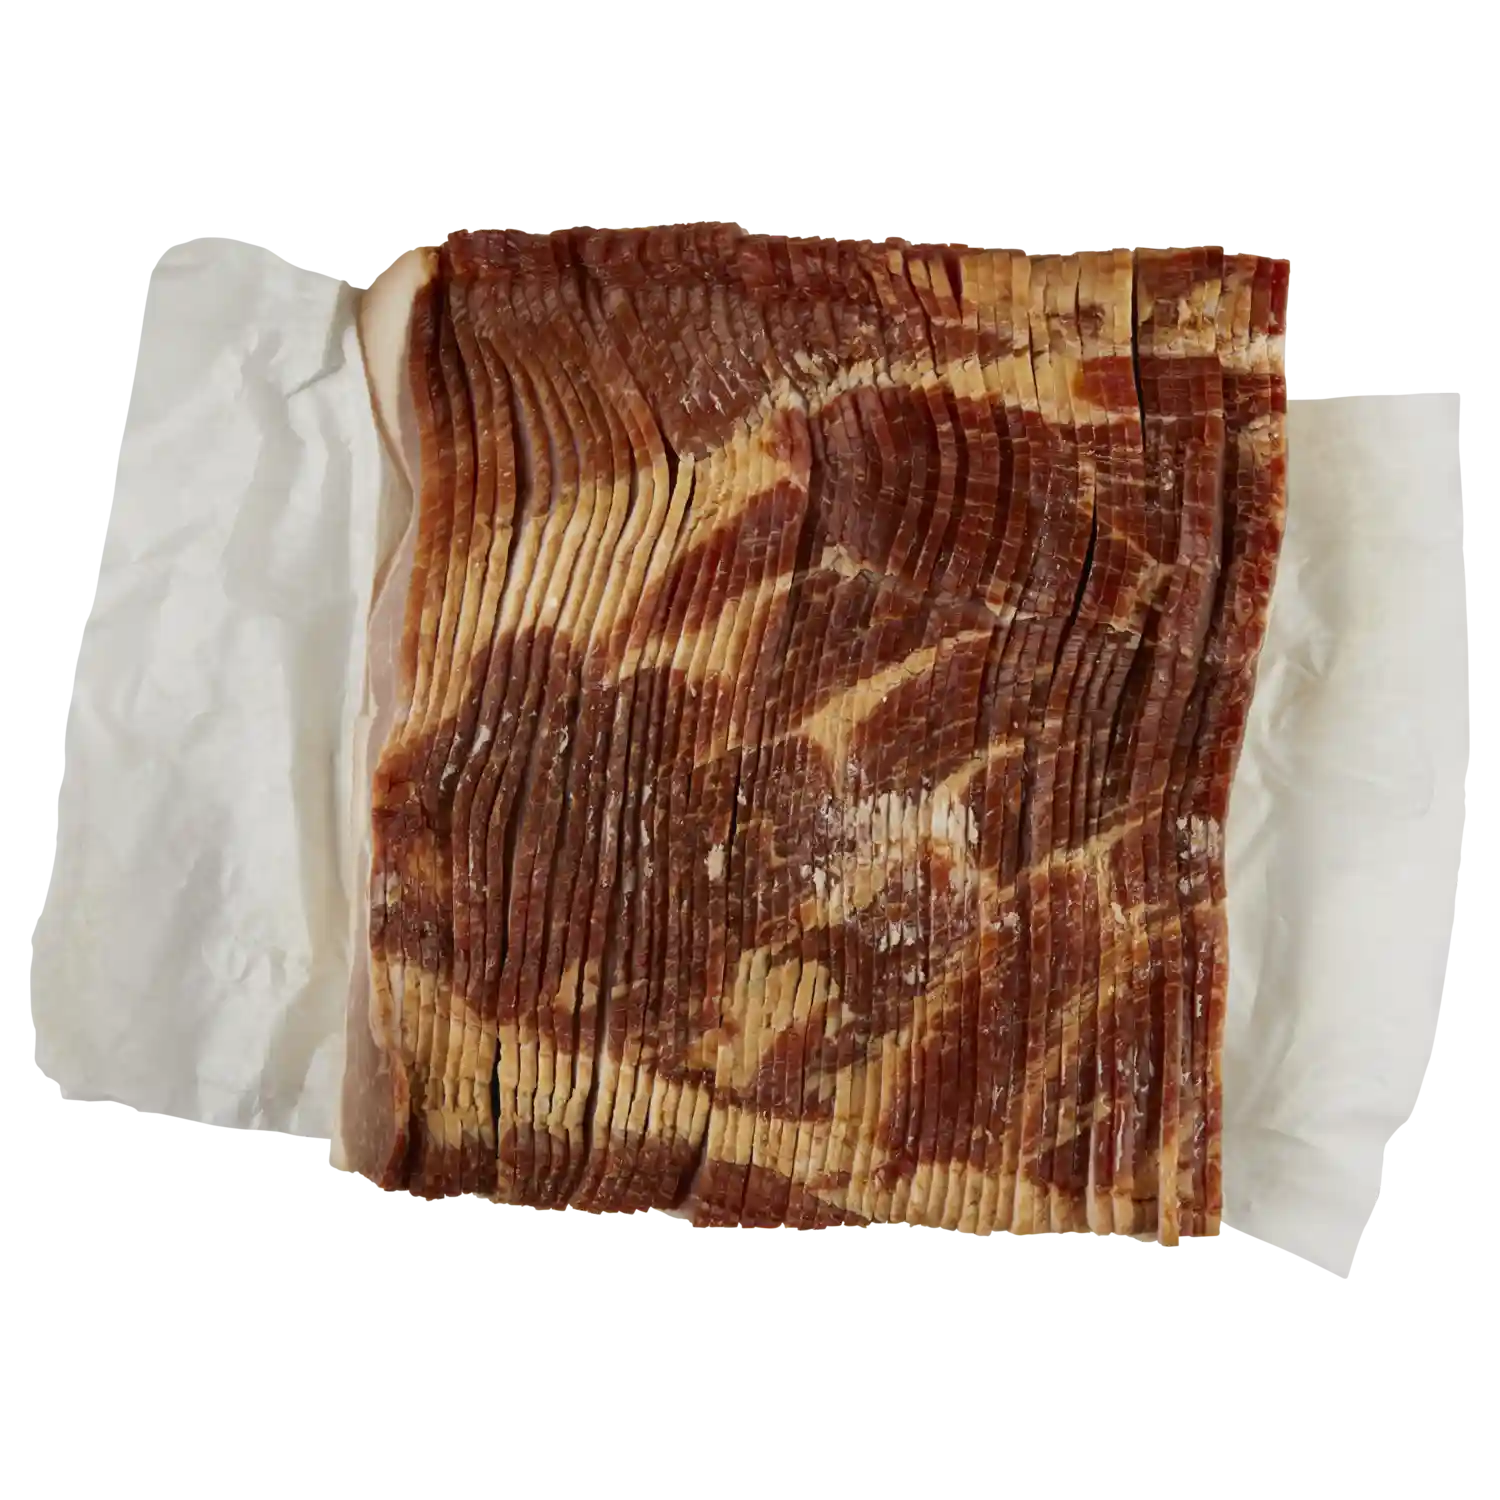 Wright® Brand Naturally Hickory Smoked Regular Sliced Bacon, Bulk, 10 Lbs, 14-18 Slices per Pound, Frozen_image_31